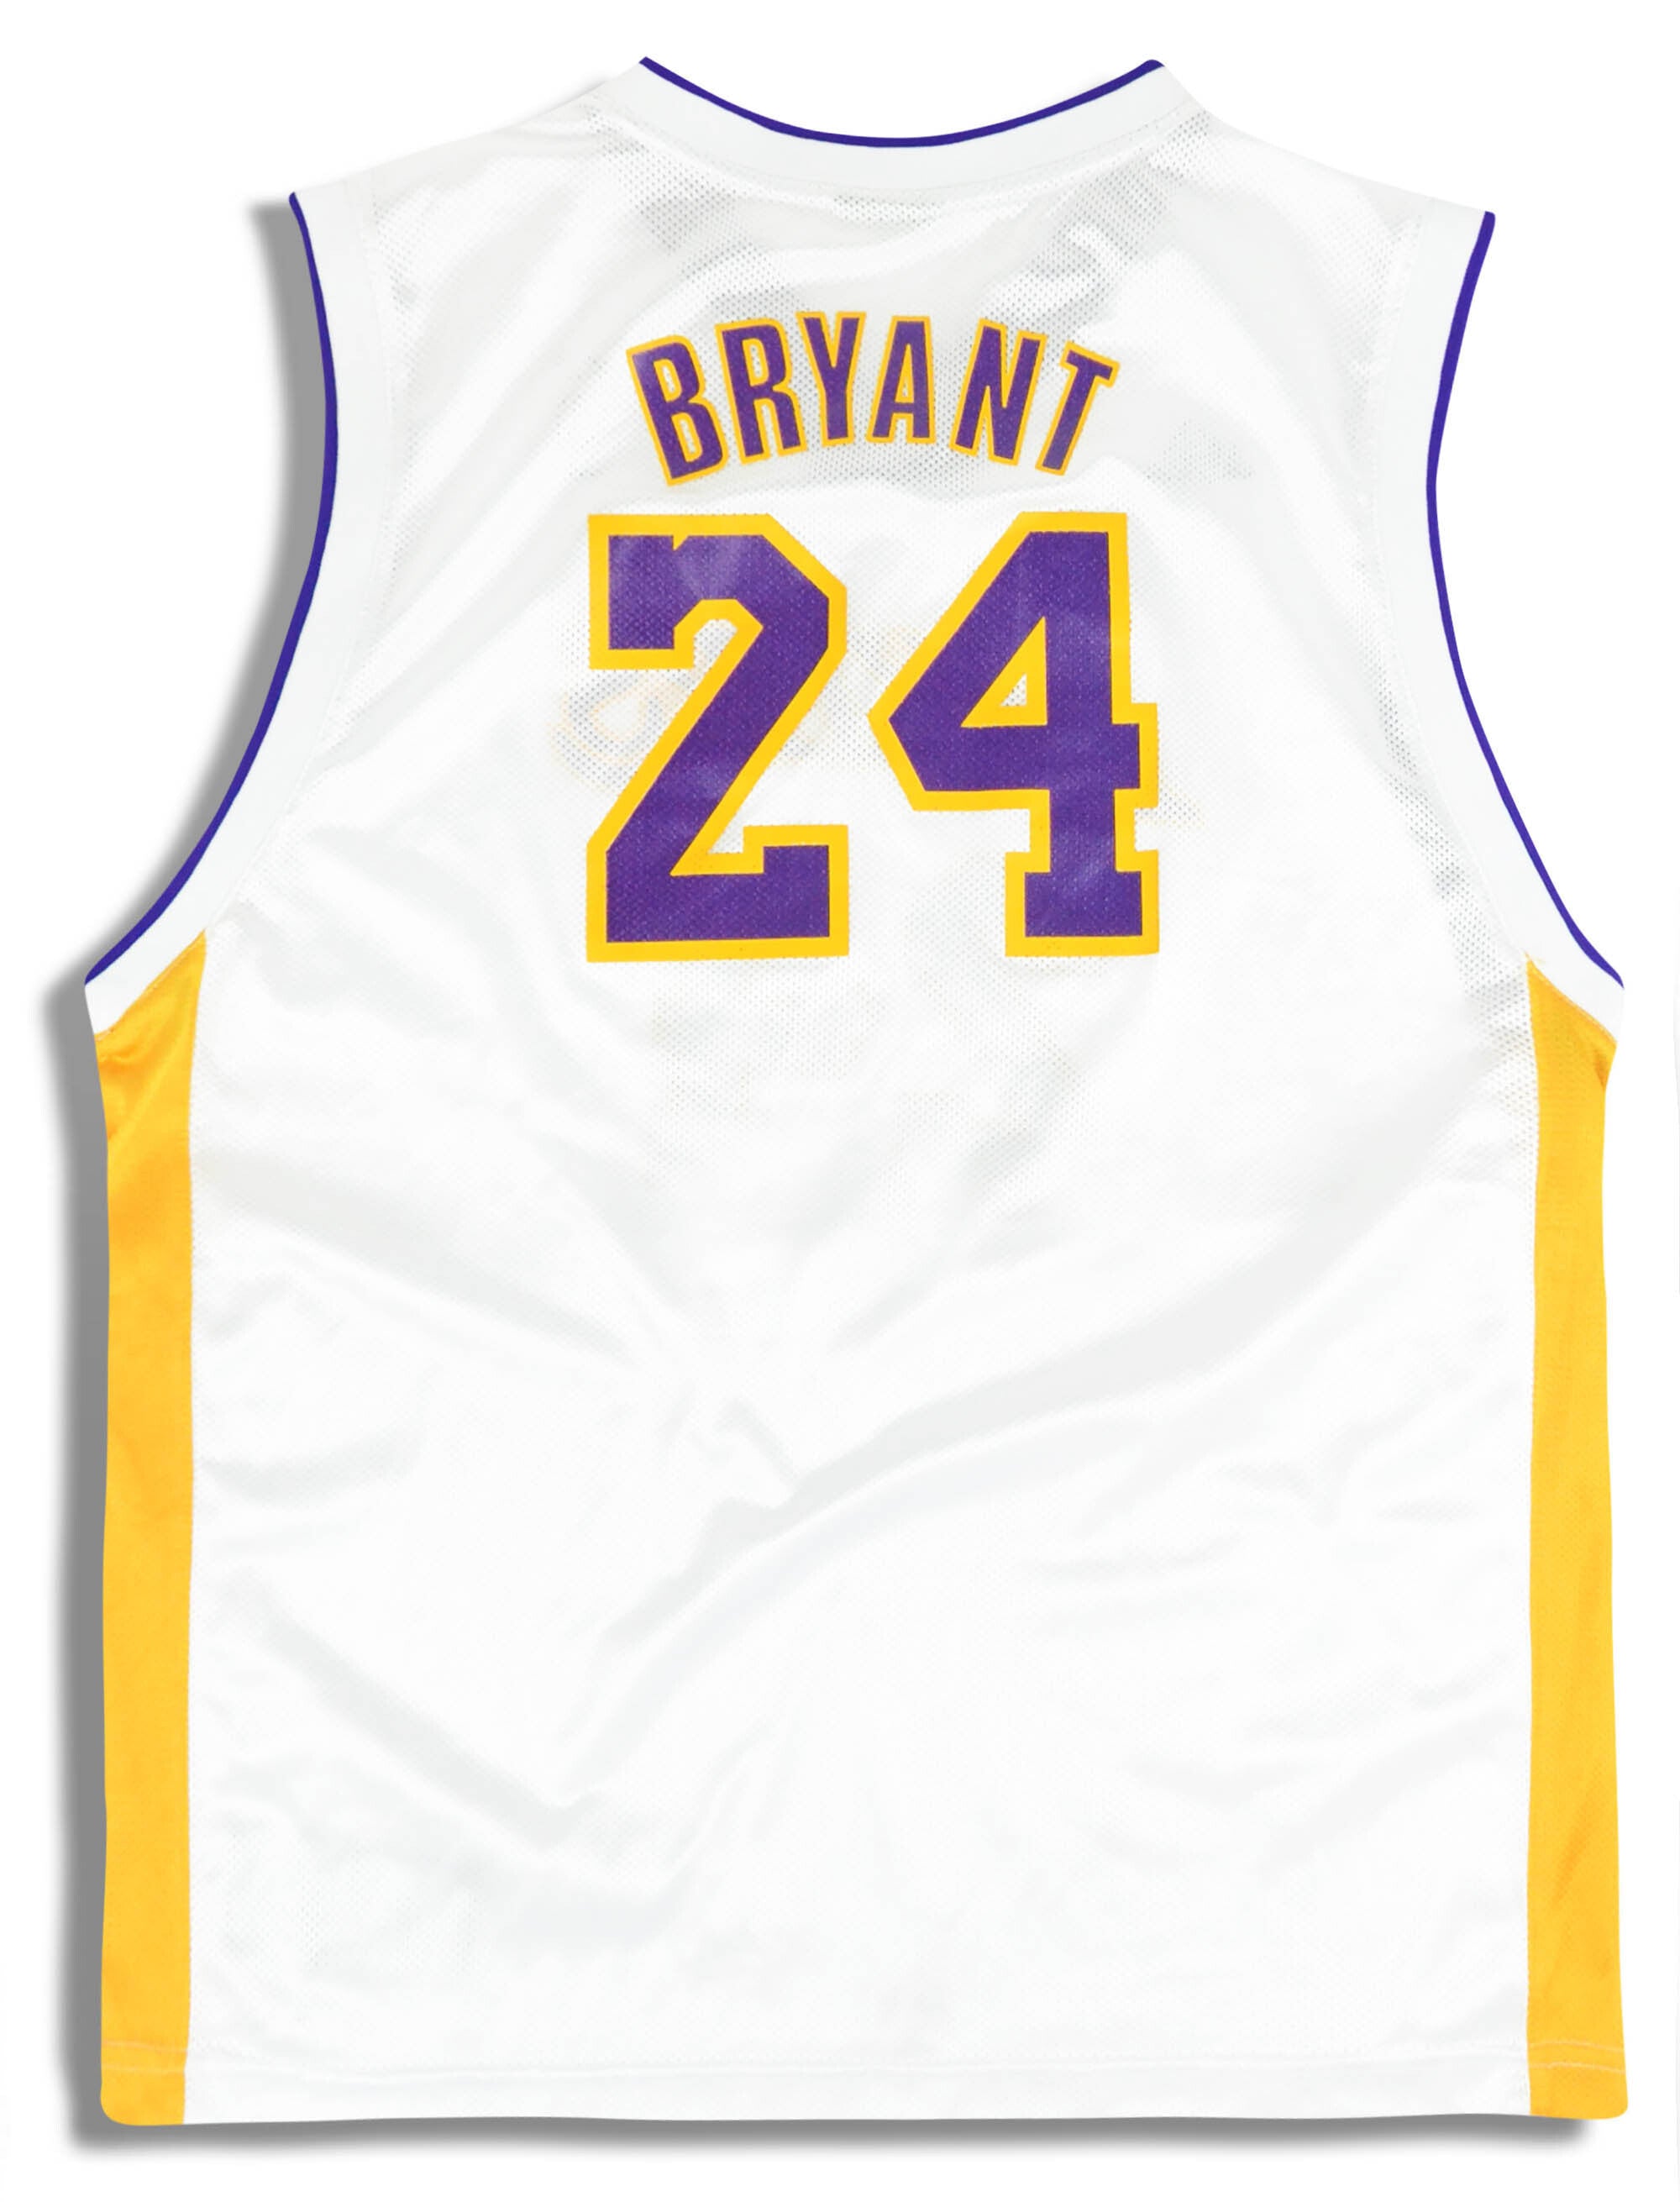 US$ 26.00 - 2009-10 LAKERS BRYANT #24 White Retro Top Quality Hot